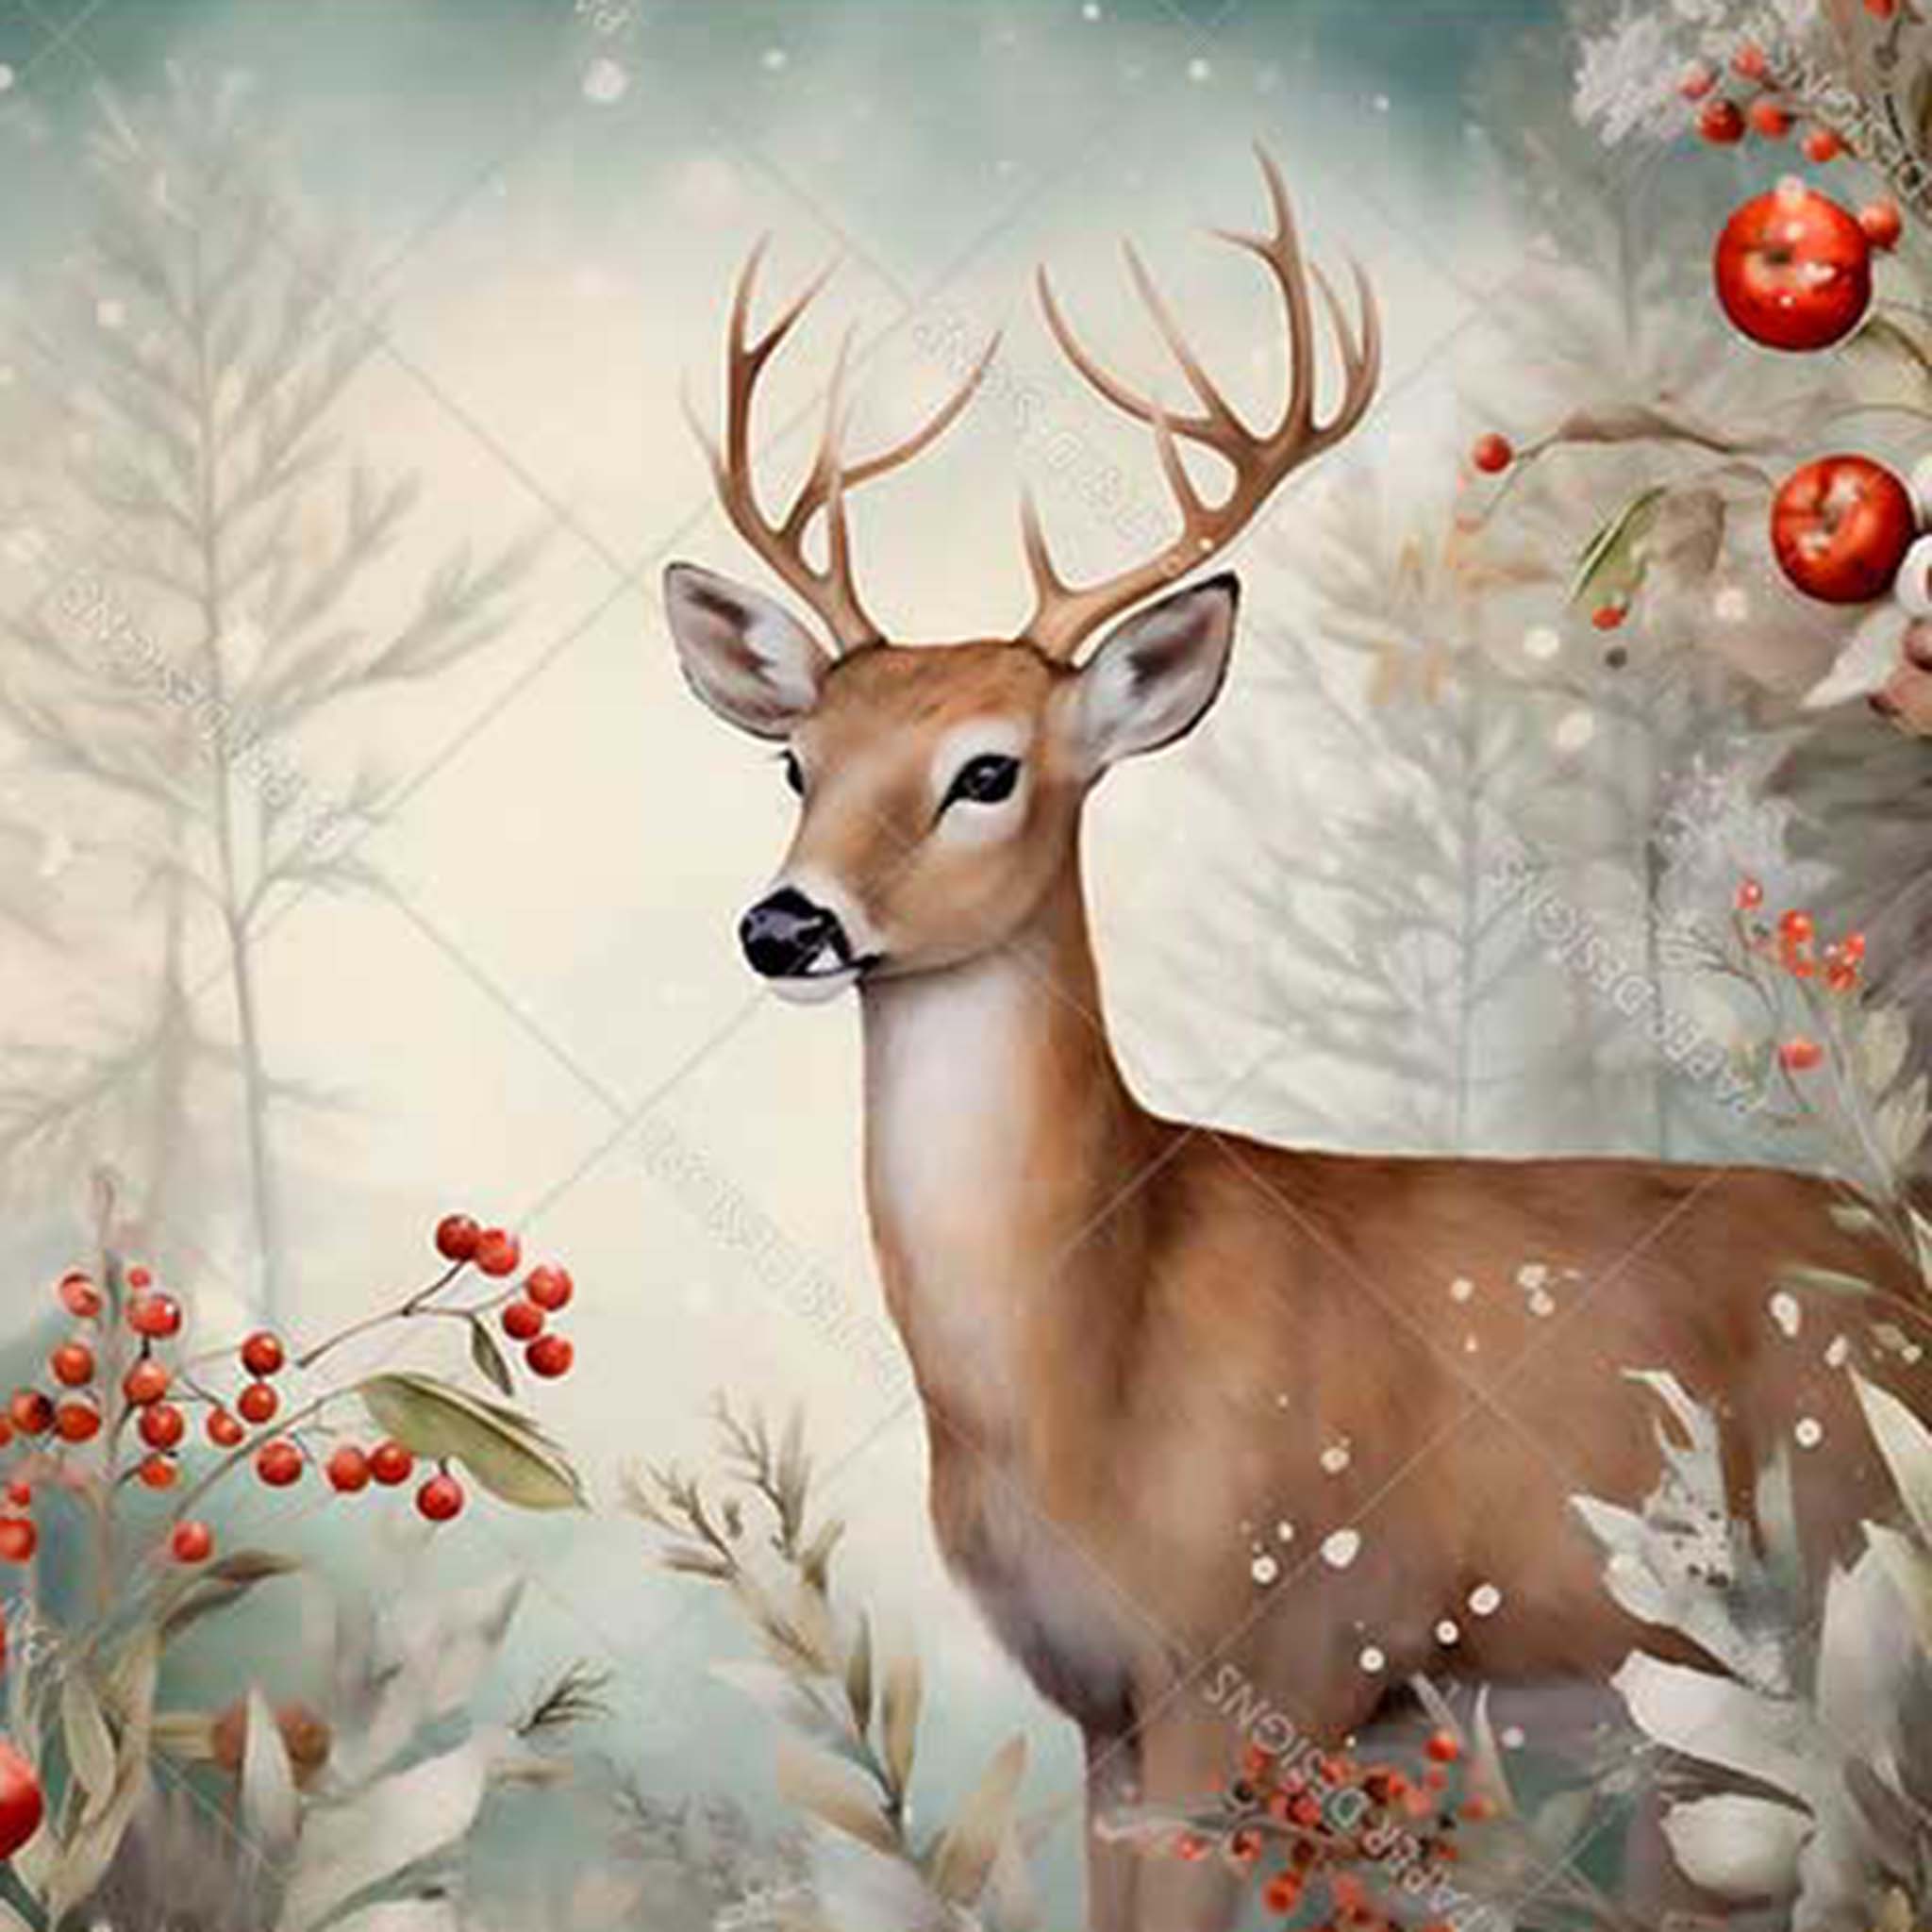 A3 rice paper design featuring a snowy scene of a majestic deer standing in a forest behind bushes of red berries.